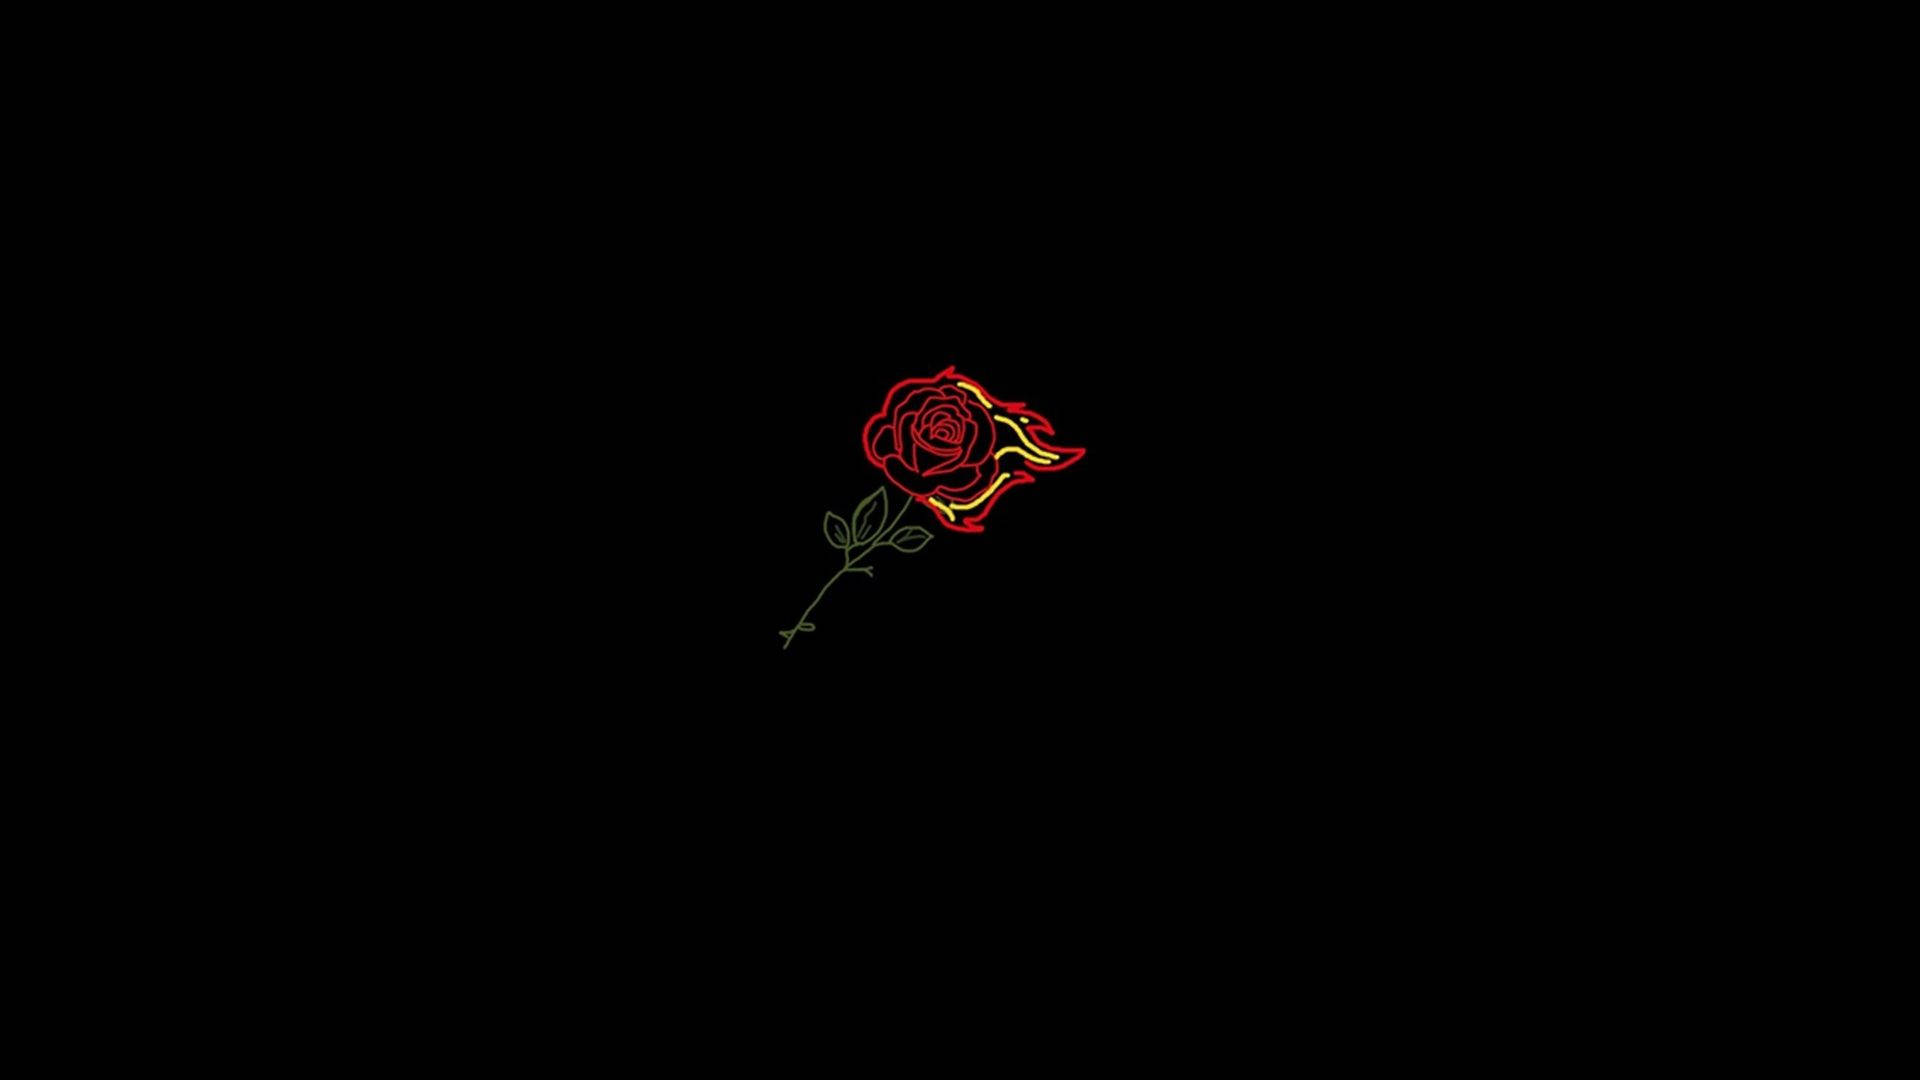 Minimalist Aesthetic Profile Picture Of A Red Rose In An Outline Drawing Against A Pitch Black Background